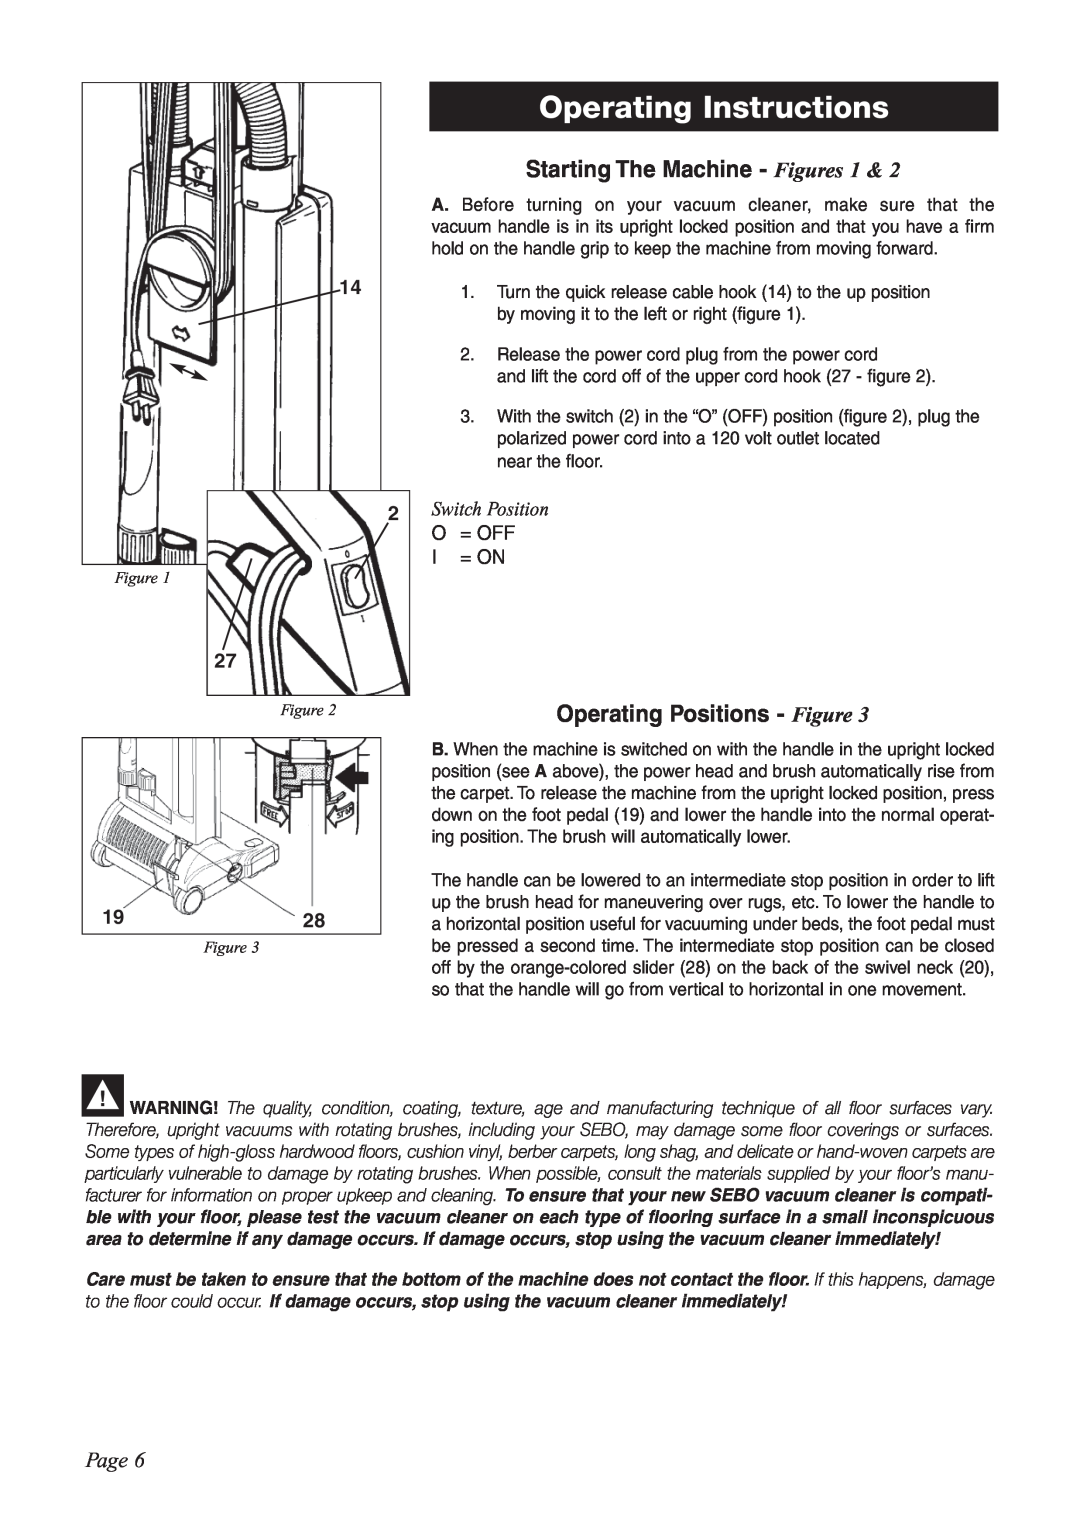 Sebo G-SERIES Operating Instructions, Starting The Machine - Figures, Operating Positions - Figure, Page, Switch Position 